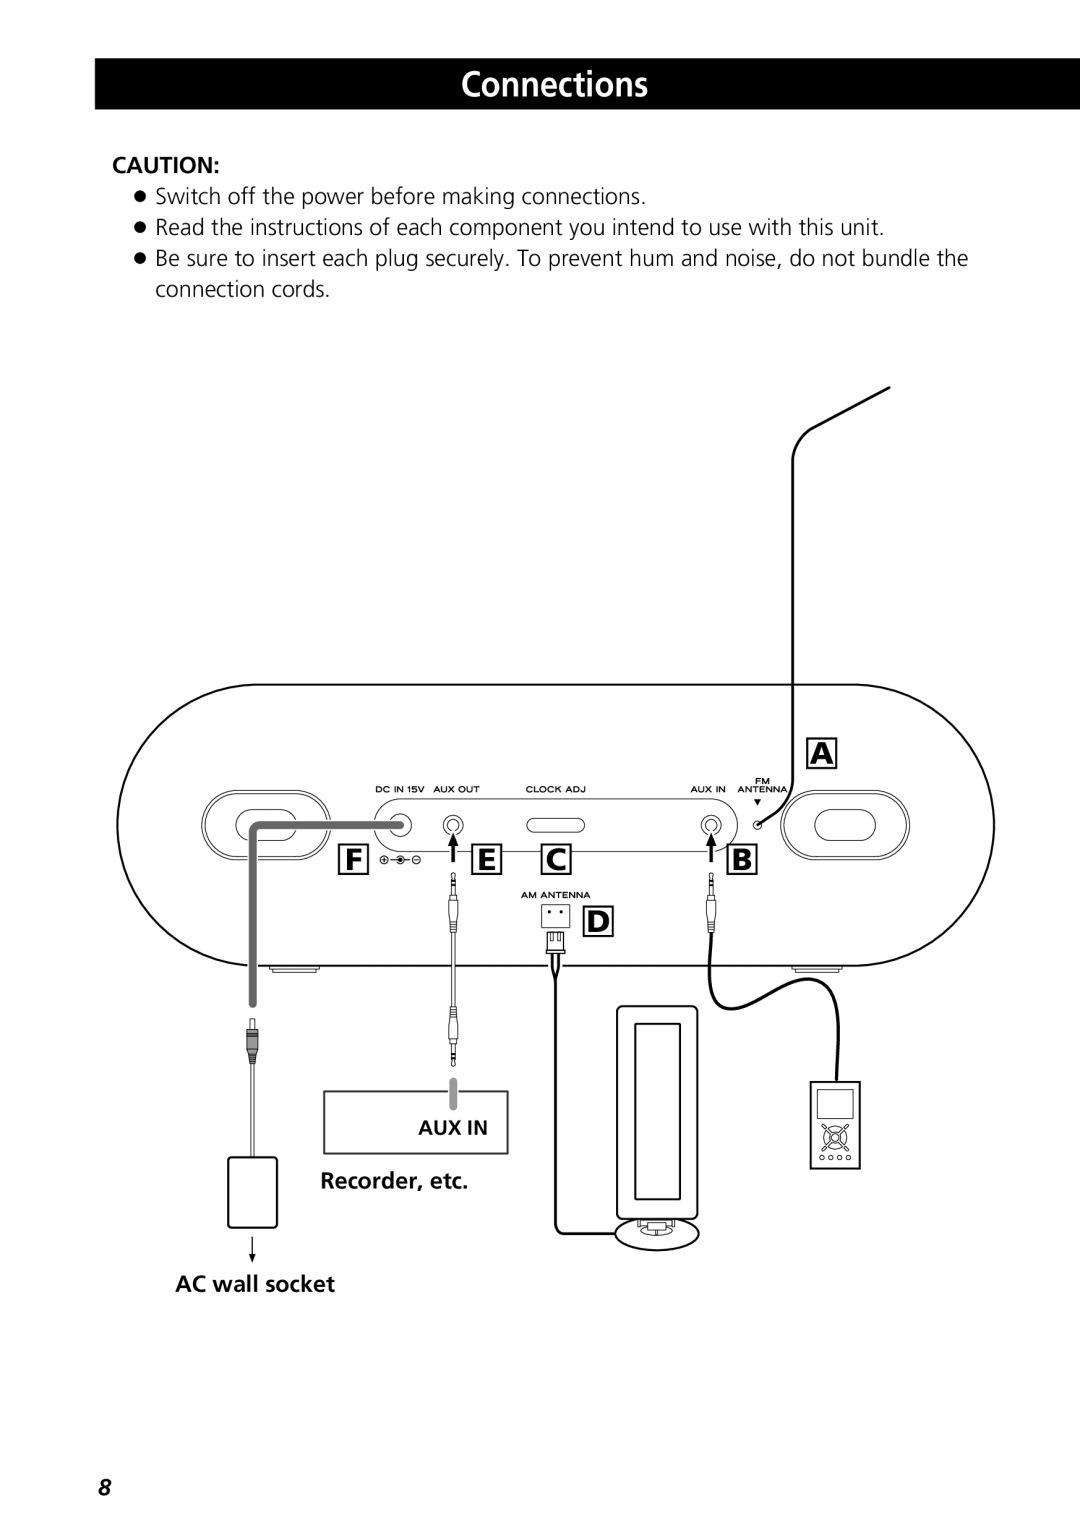 Teac GR-7i owner manual Connections, A Cb D 